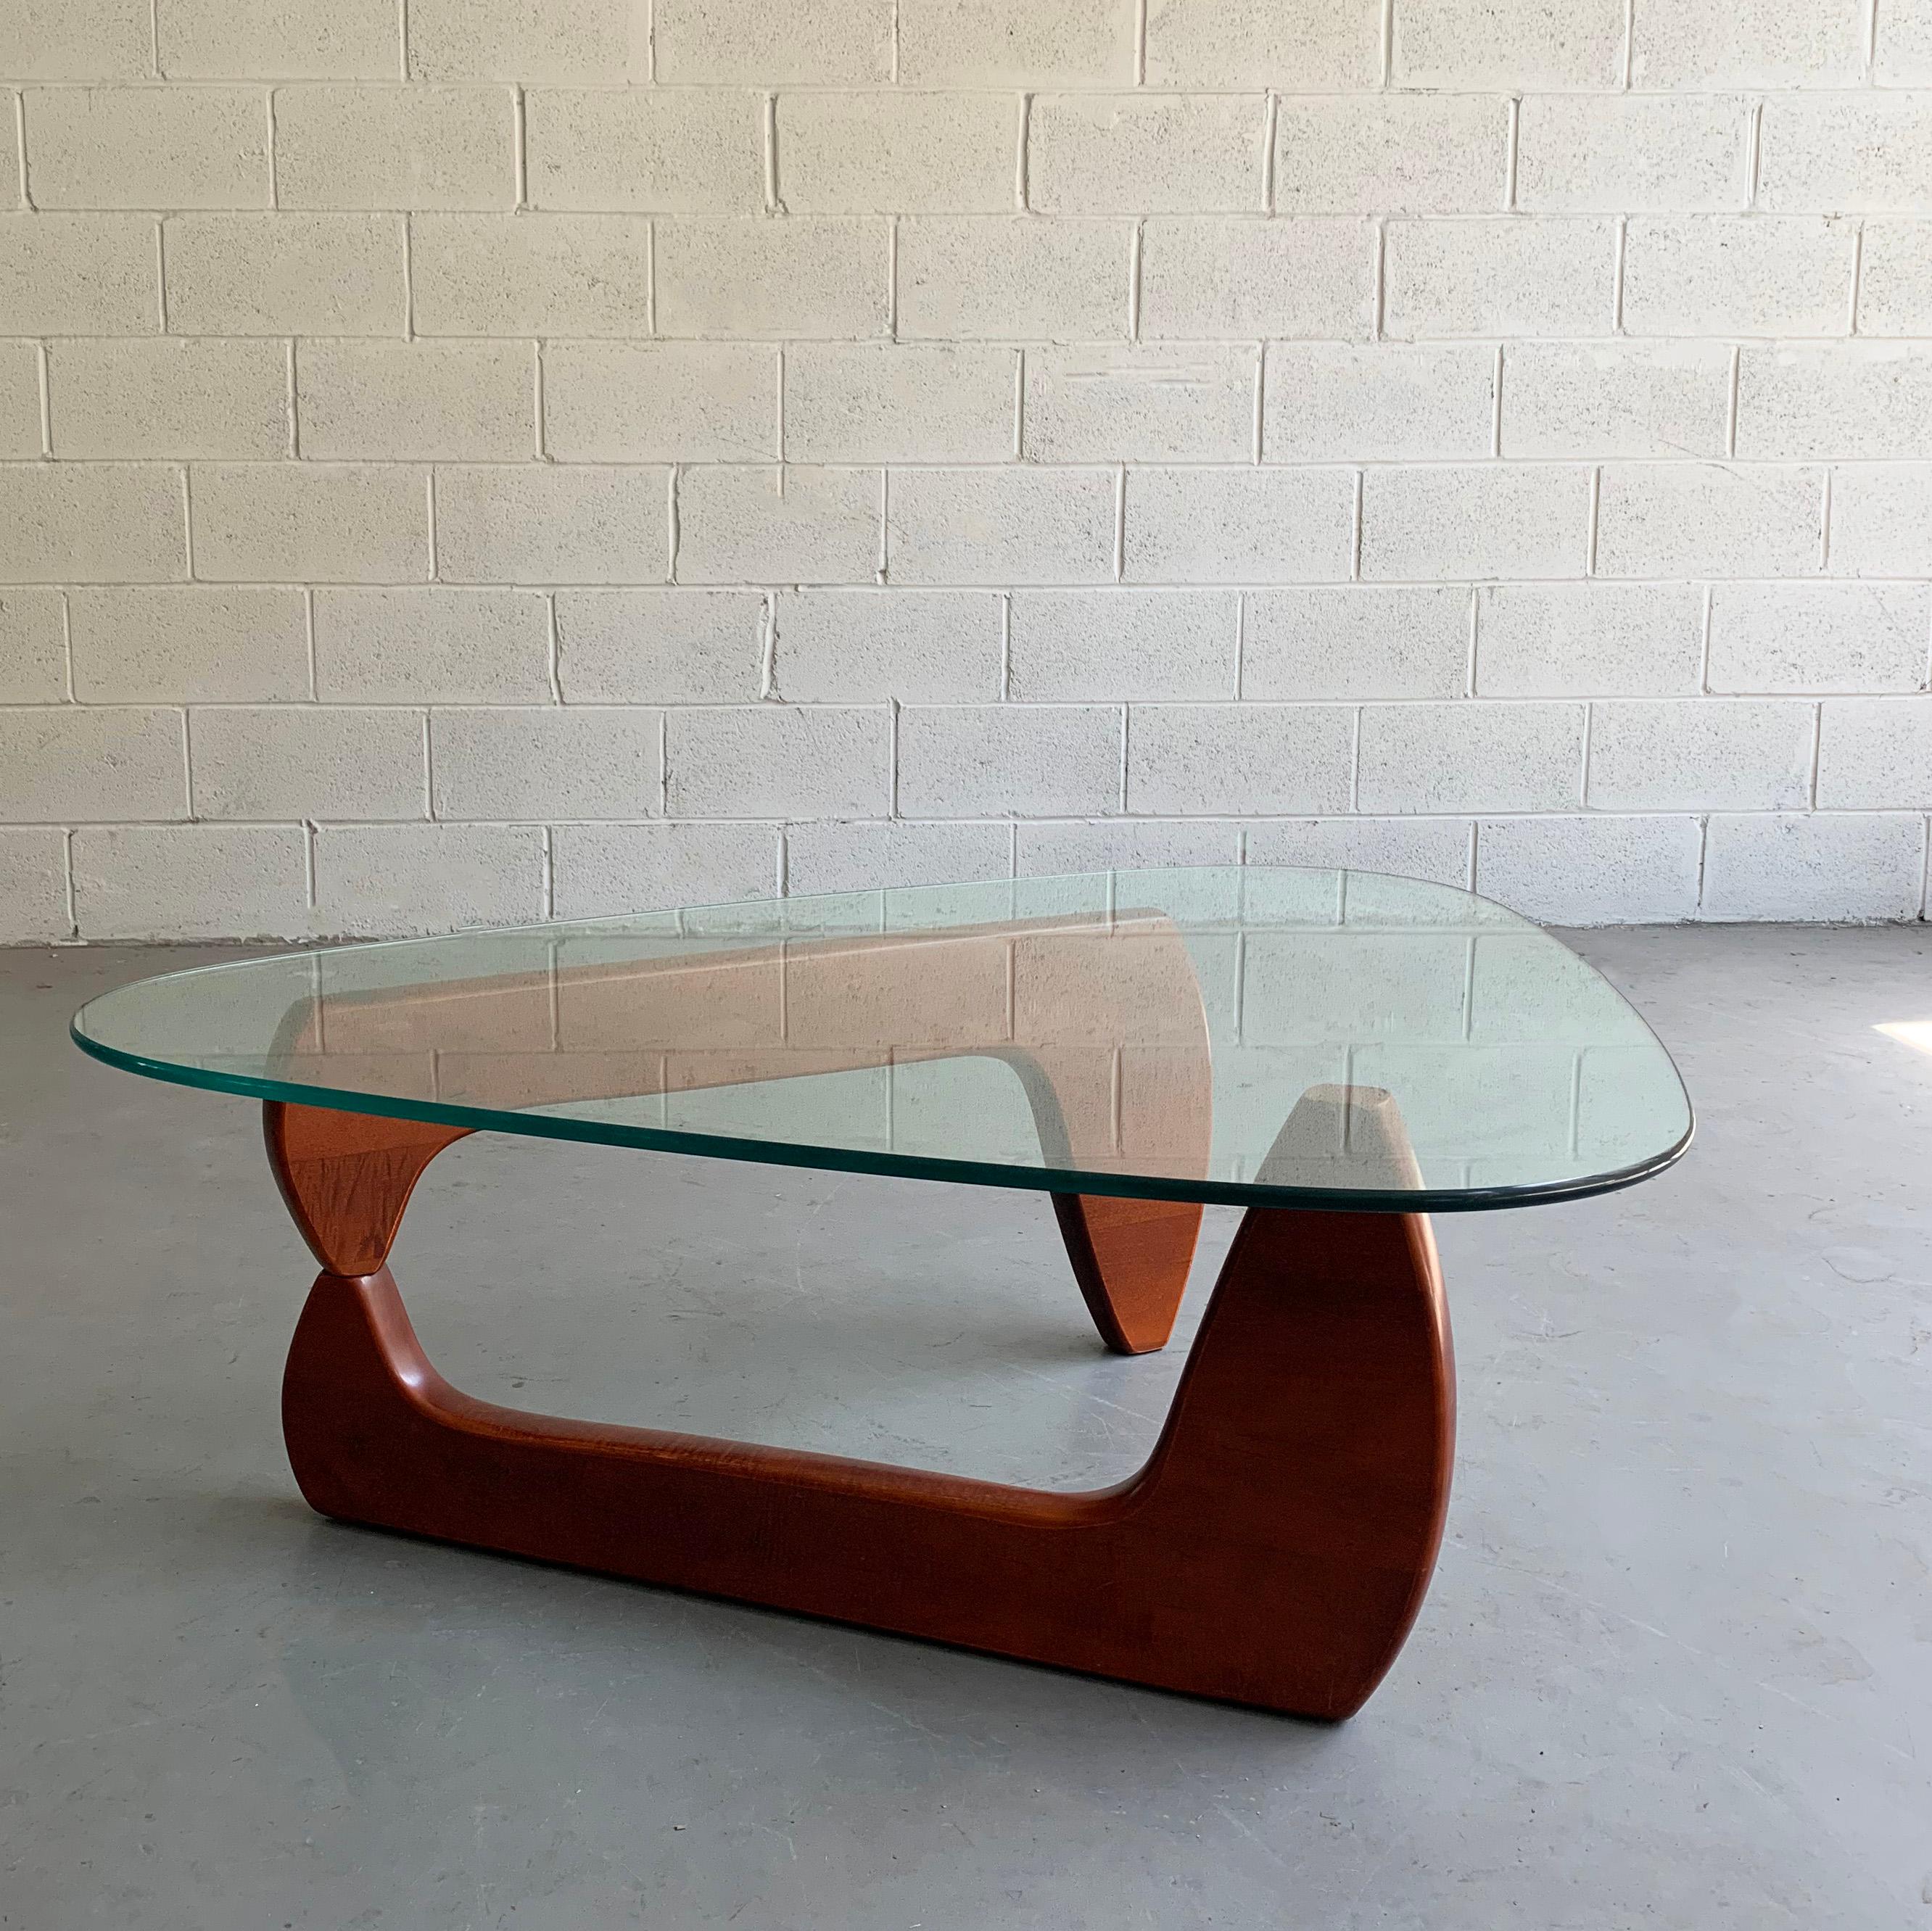 Mid-Century Modern coffee table in the Classic style of Isamu Noguchi features a pivoting, biomorphic, stained maple base with triangular glass top.